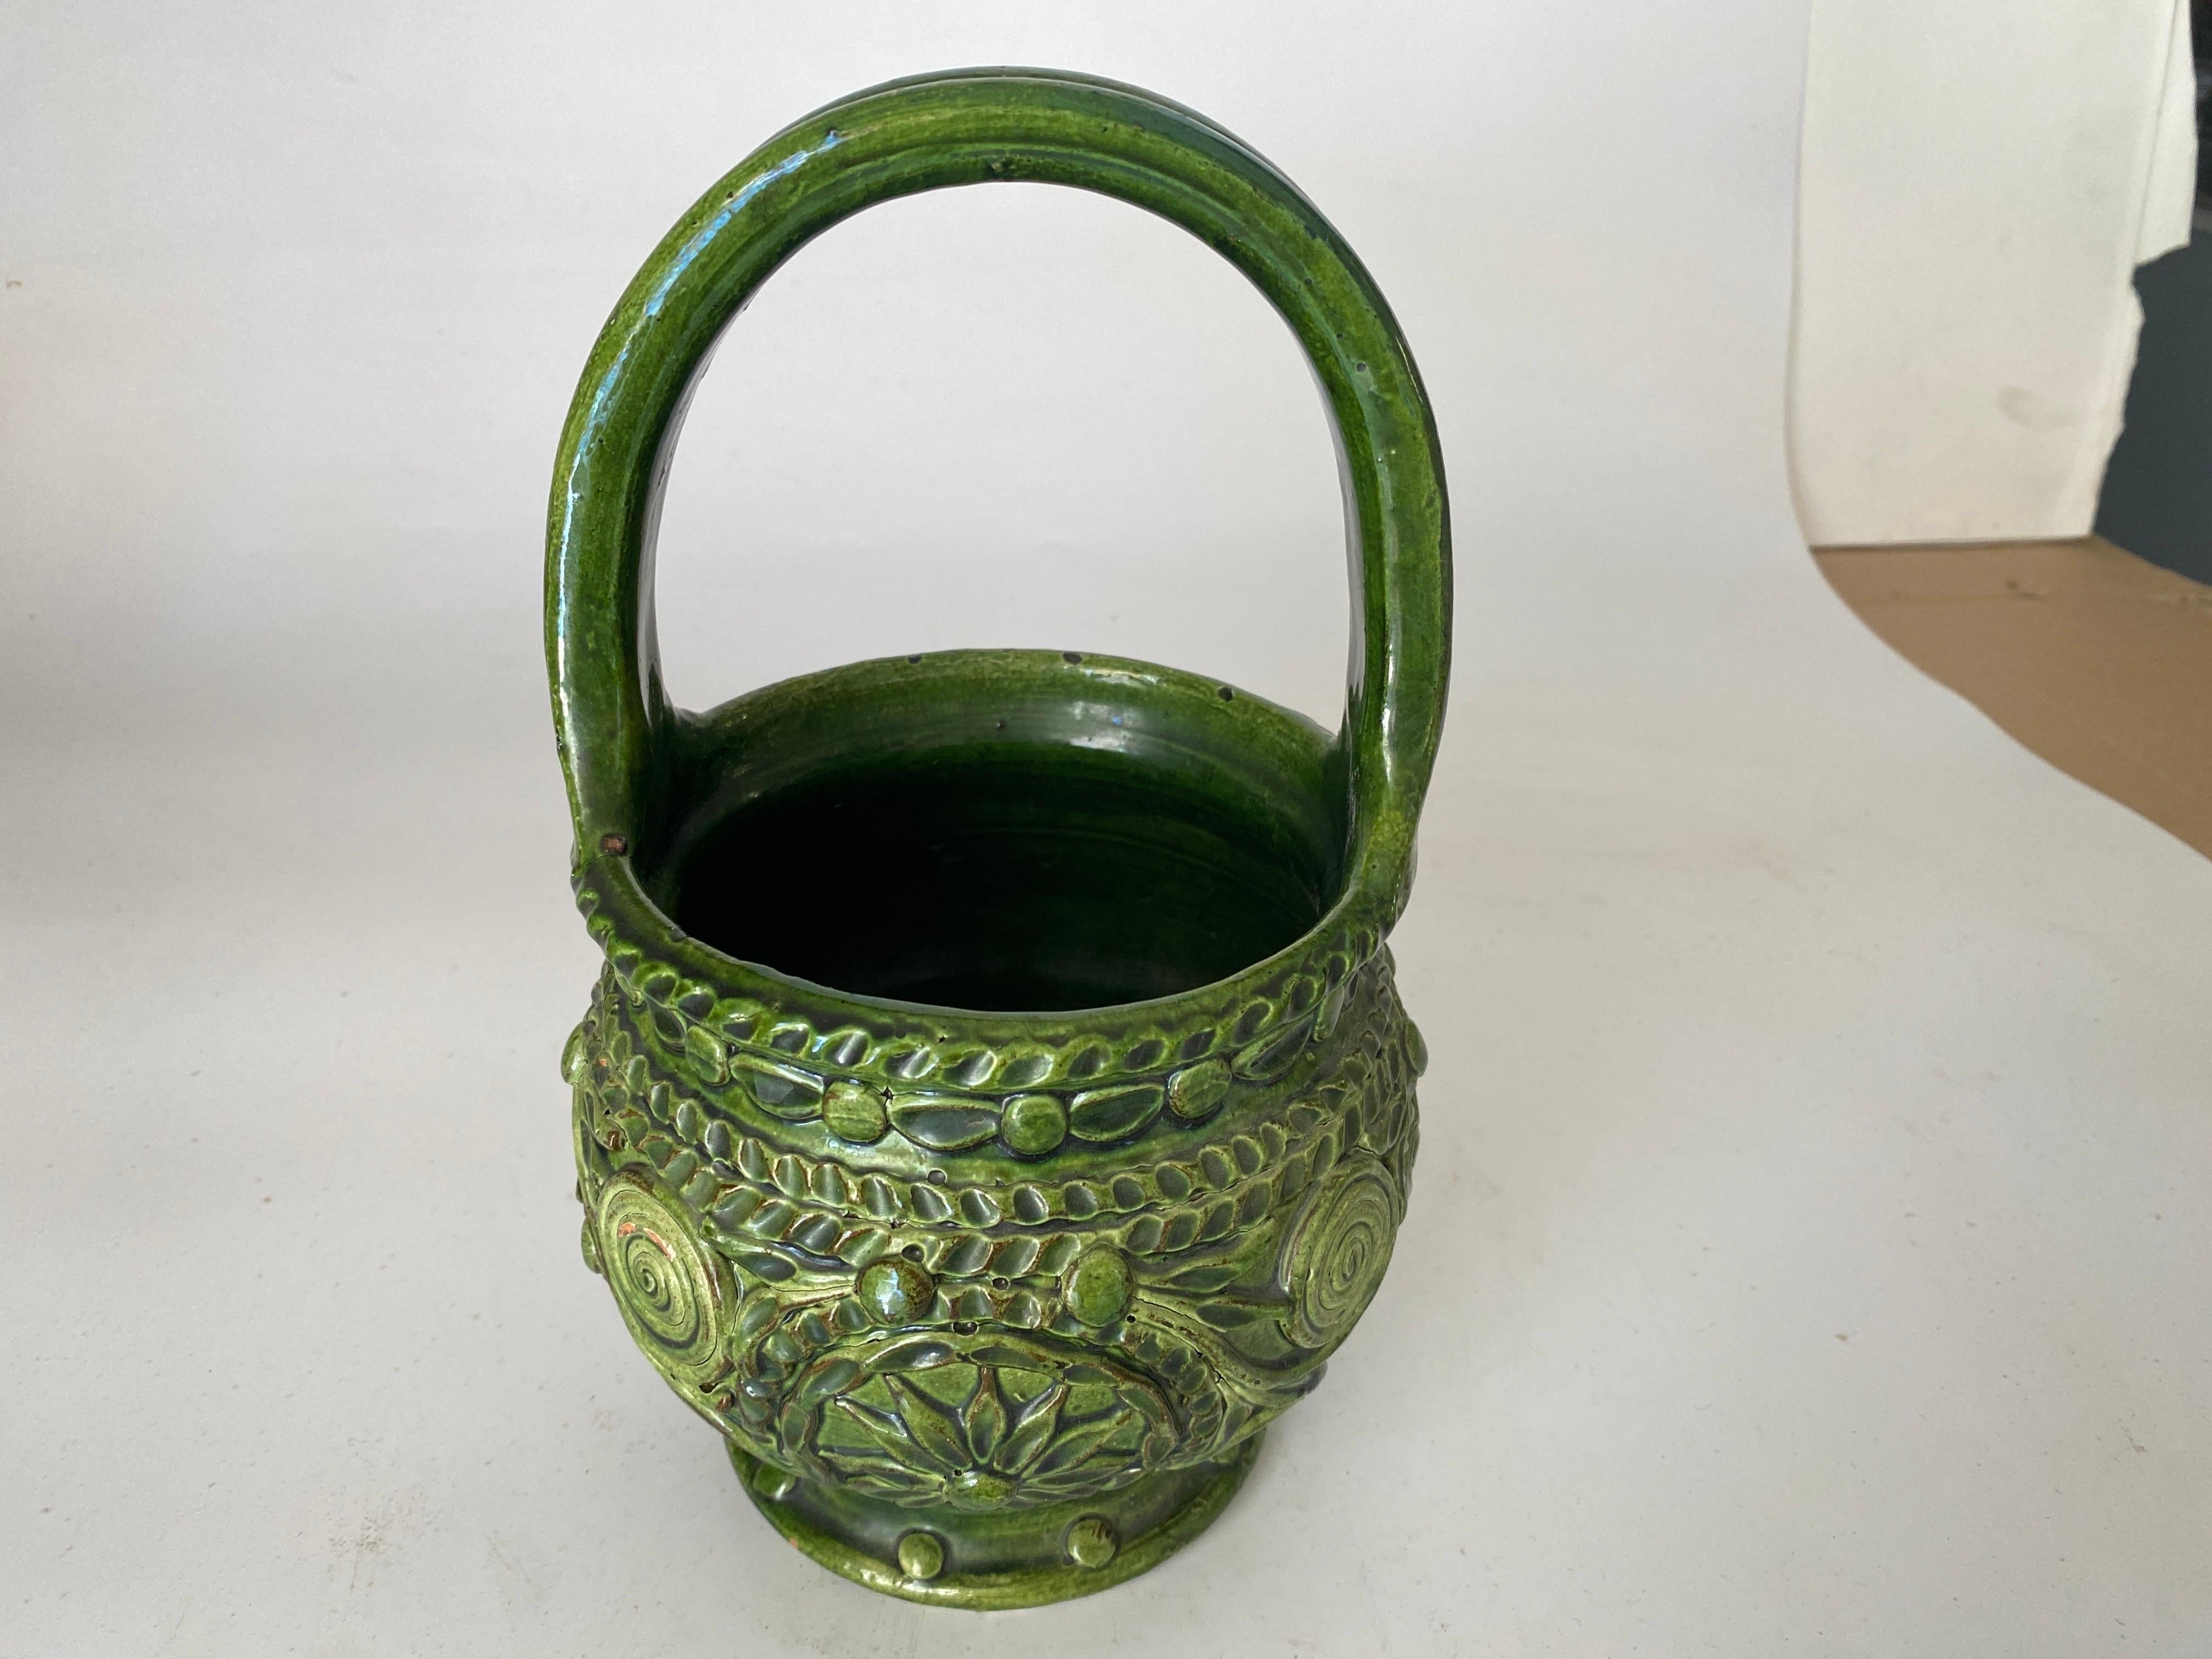  Pot or Box 19th Century Majolica France Ceramic Green with an Circular Handle For Sale 2